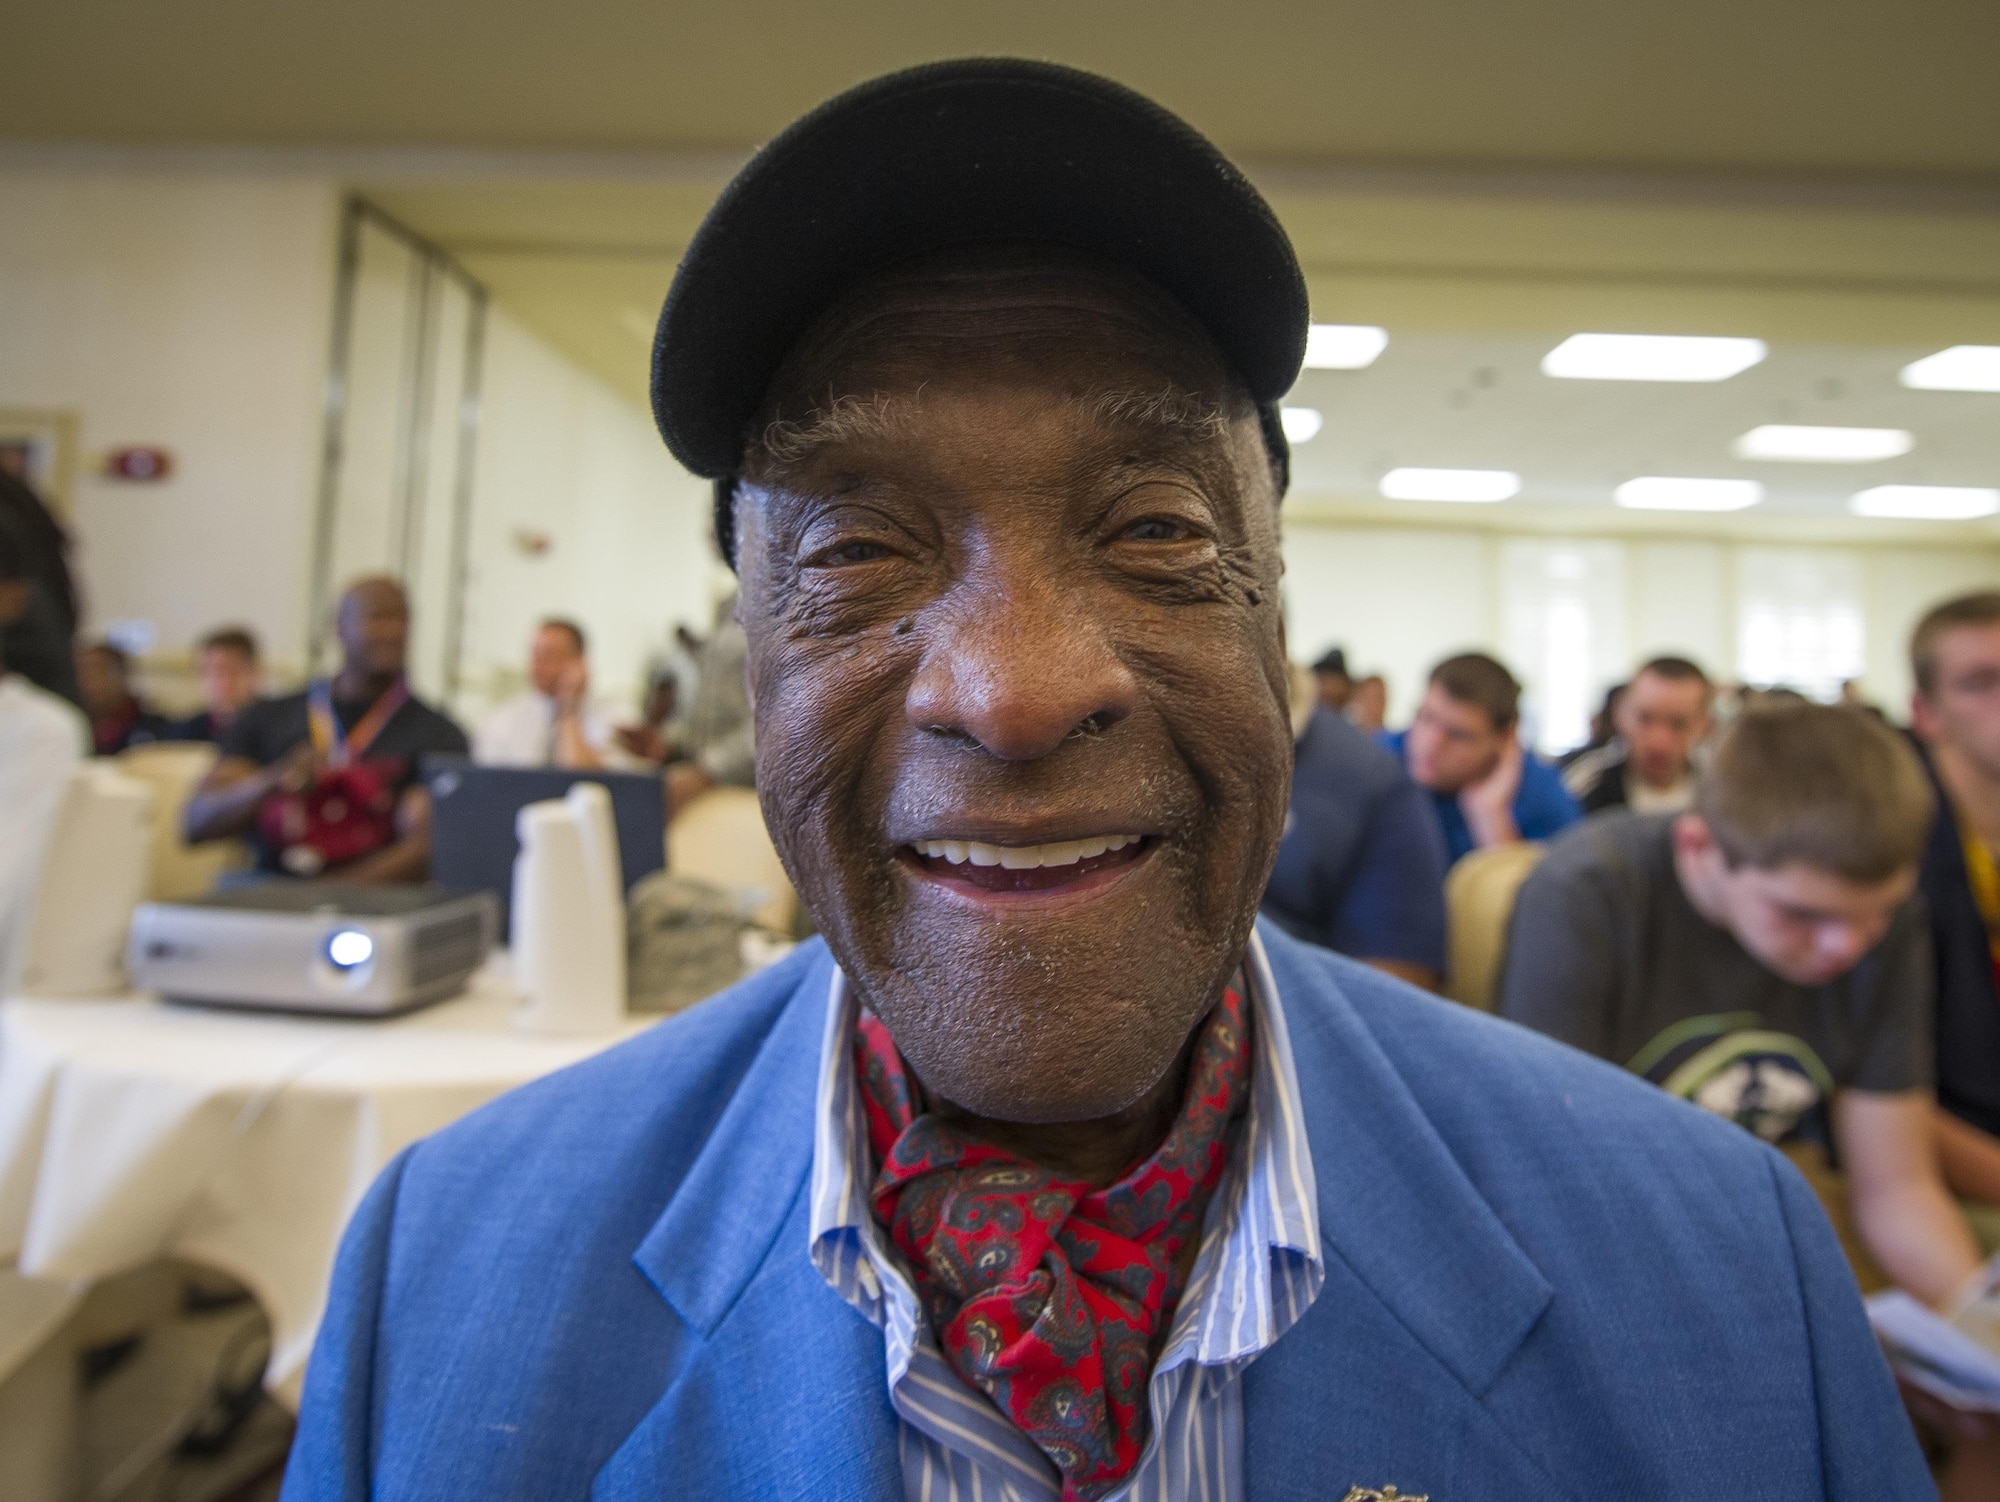 (Ret.) Lt. Col. Enoch “Woody” Woodhouse, an original Tuskegee Airman, awaits the guest speaker Feb. 23, 2017, the morning of the Tuskegee Airmen Career Day at Joint Base Charleston, S.C. More than 150 students from middle and high school boys from 17 Lowcountry school visited Joint Base Charleston Feb. 23, 2017, to learn about jobs in aviation as part of the second annual Tuskegee Airmen Career Day, hosted by the 315th Airlift Wing. The boys were able to learn about military and civilian careers in aviation by more than 15 different career fields. (U.S. Air Force photo by Senior Airman Tom Brading)